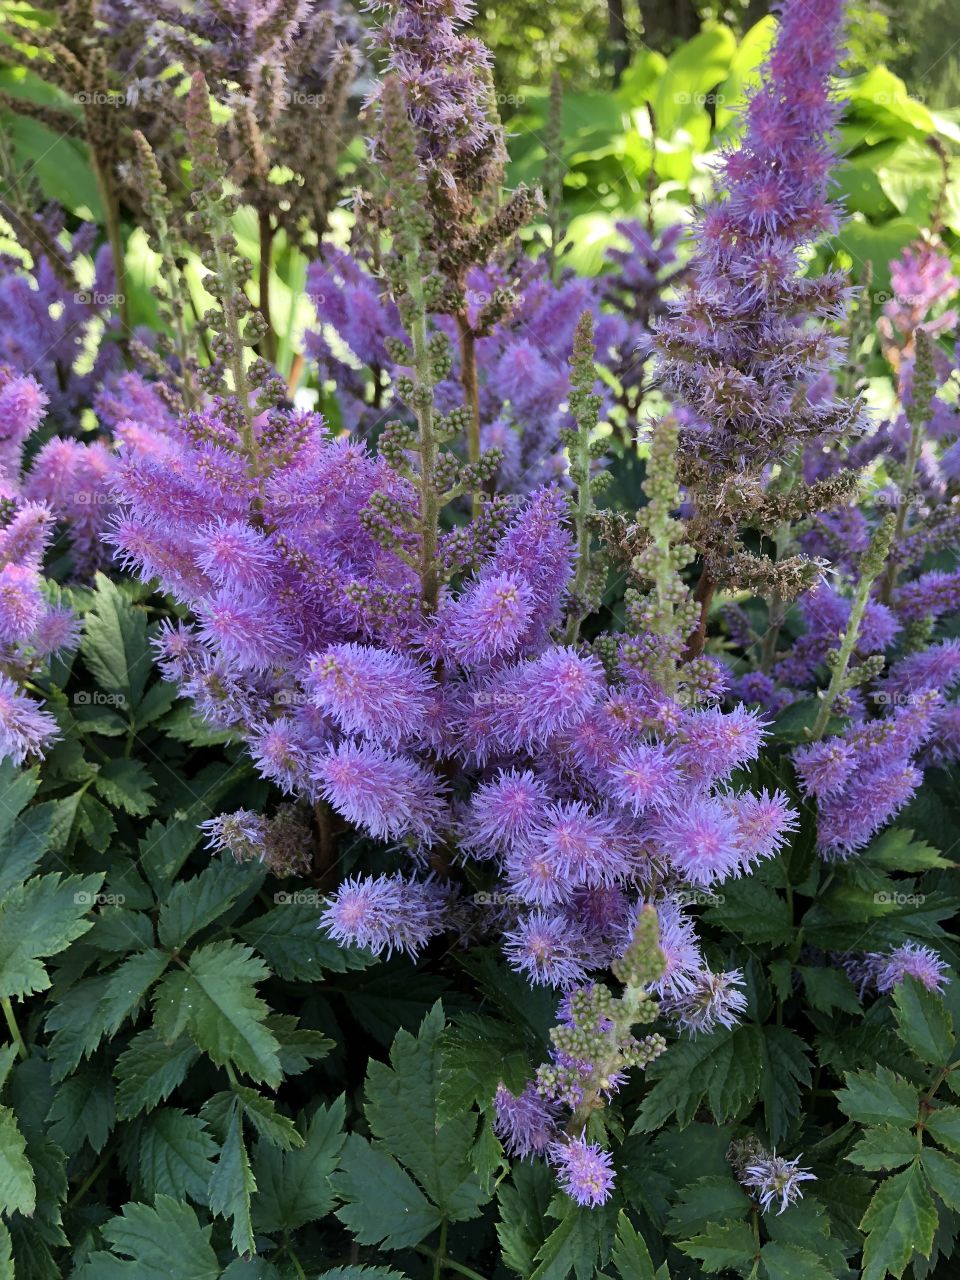 Summer bright purple floral in full bloom in Milwaukee, Wisconsin. Photos can be used for both print or digital. Pics taken using iPhone 8. 